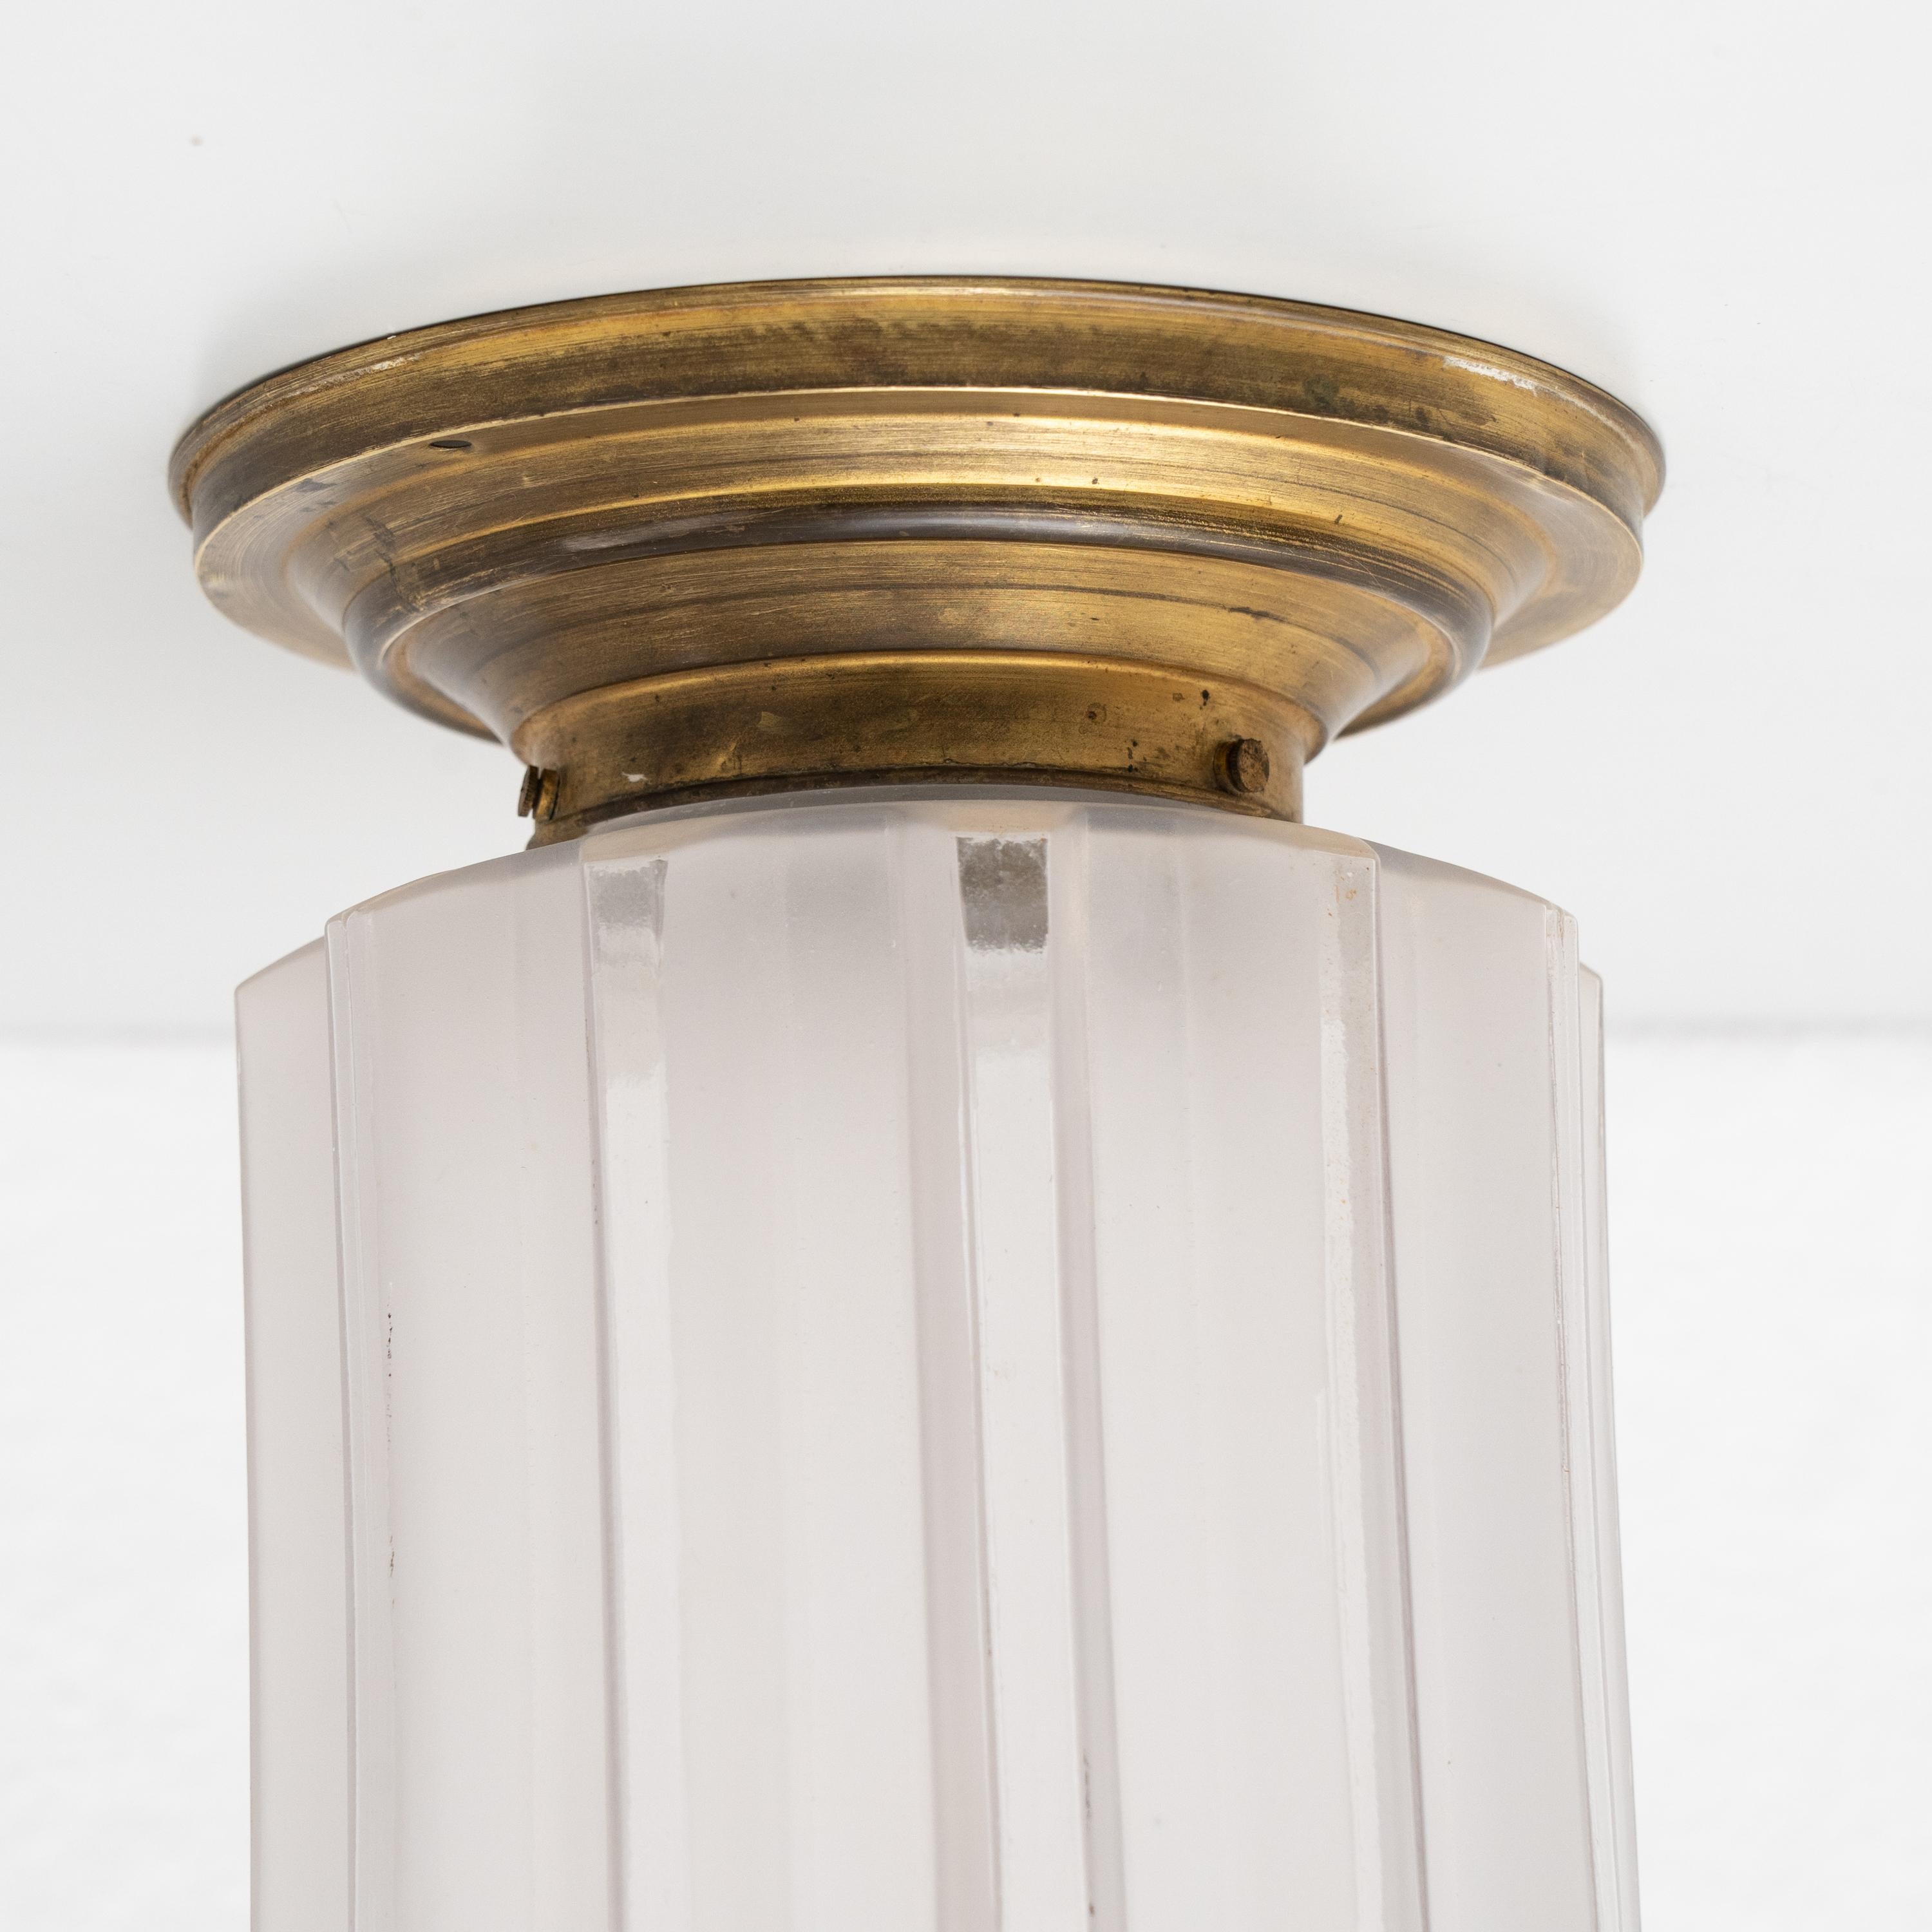 Vintage Art Deco Brass and Glass Ceiling Lamp, circa 1940 For Sale 5